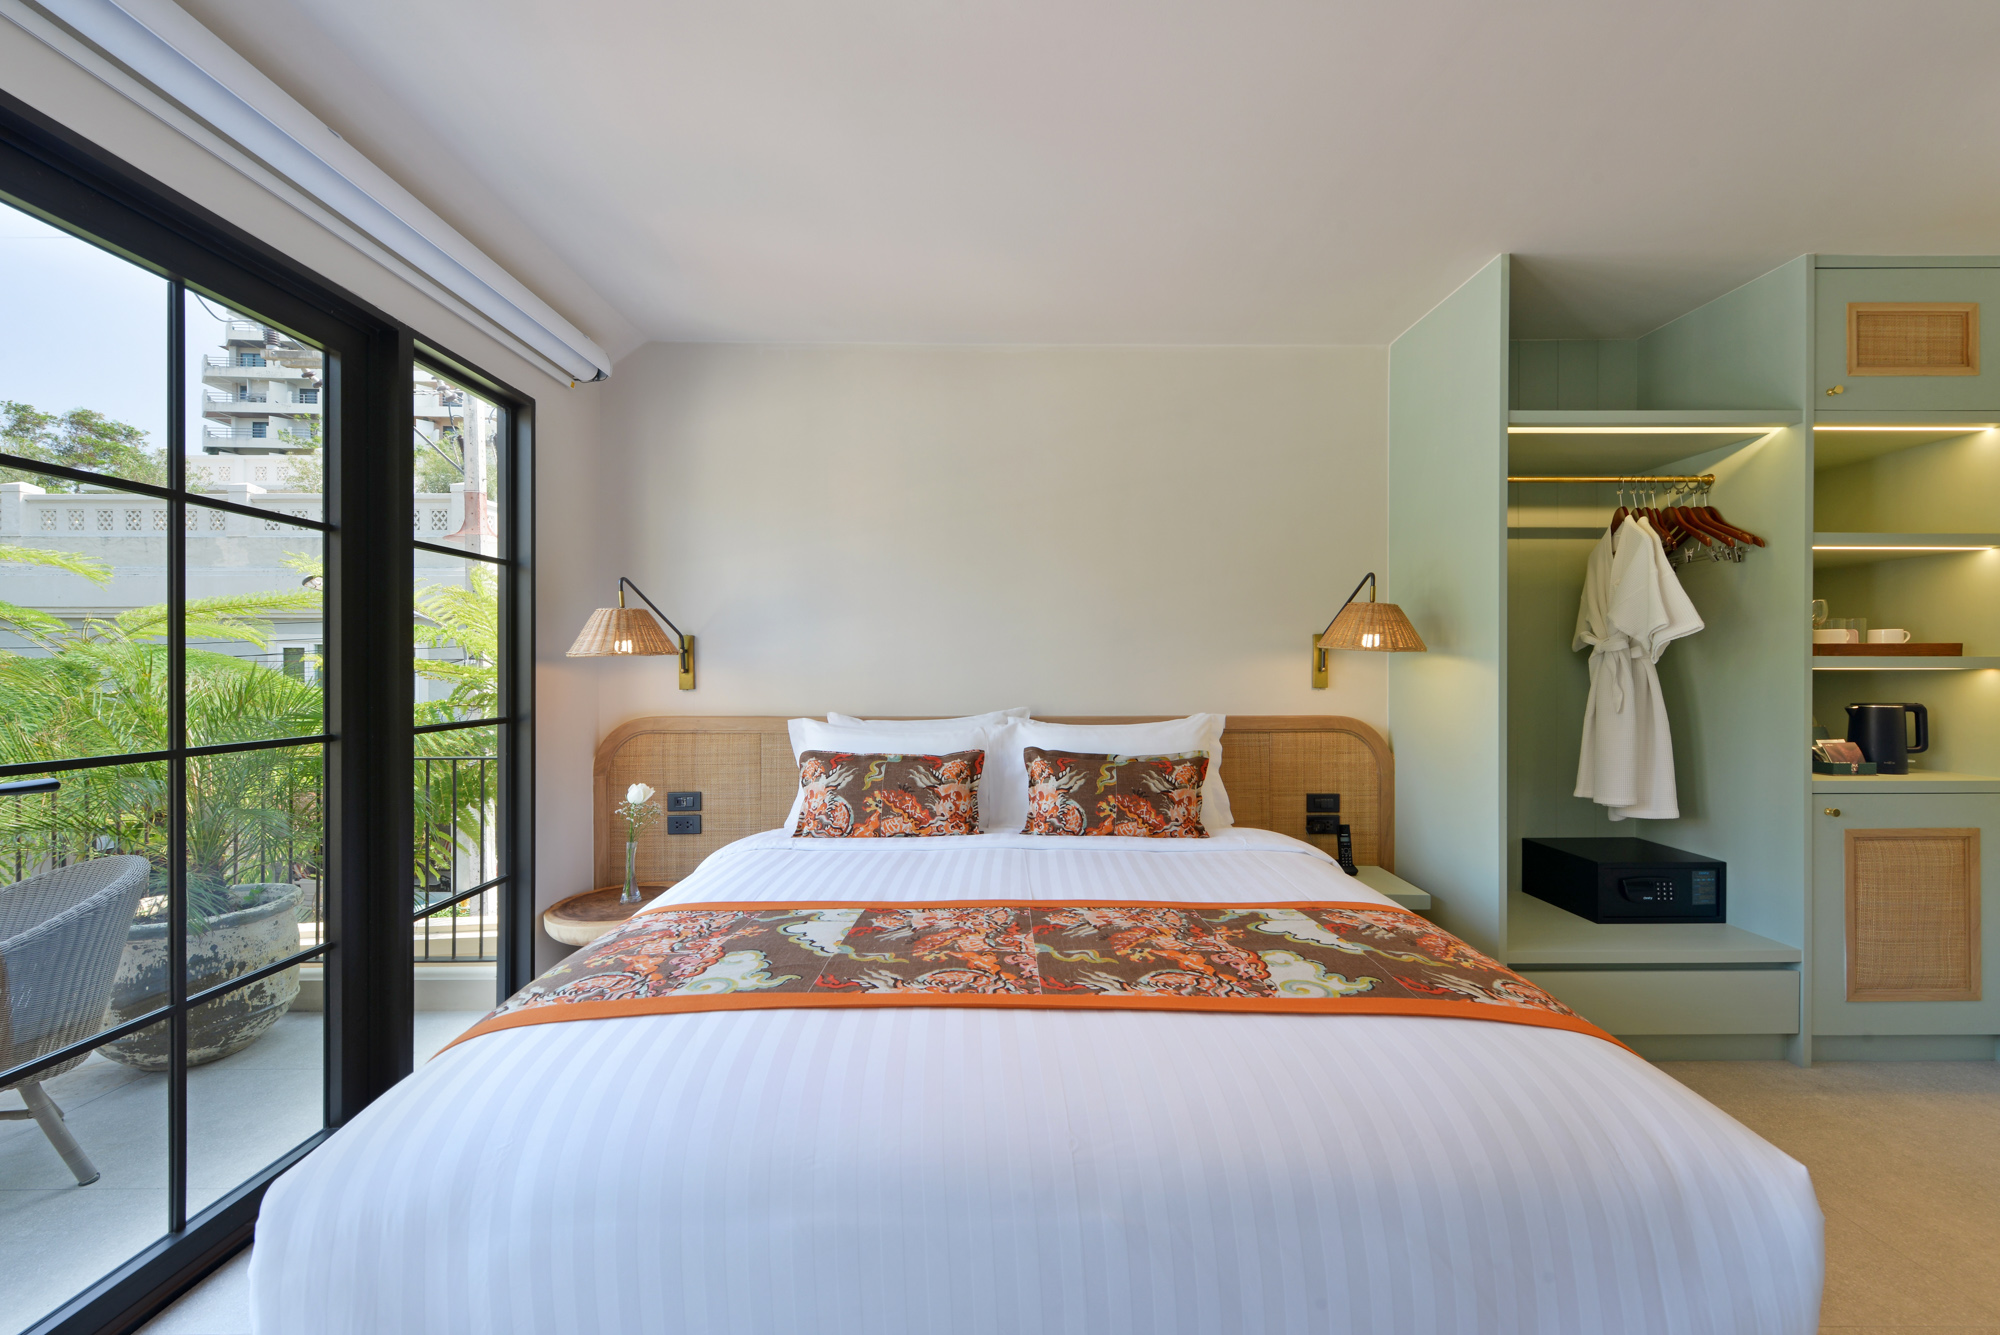 Garda Deluxe Rooms are located either in the newly renovated Garda Building and in the Private Villa area. They are approximately 70 meters from the beach.

The bedroom offers the choice of a king size bed or two queen size beds, and the bathroom has a shower.